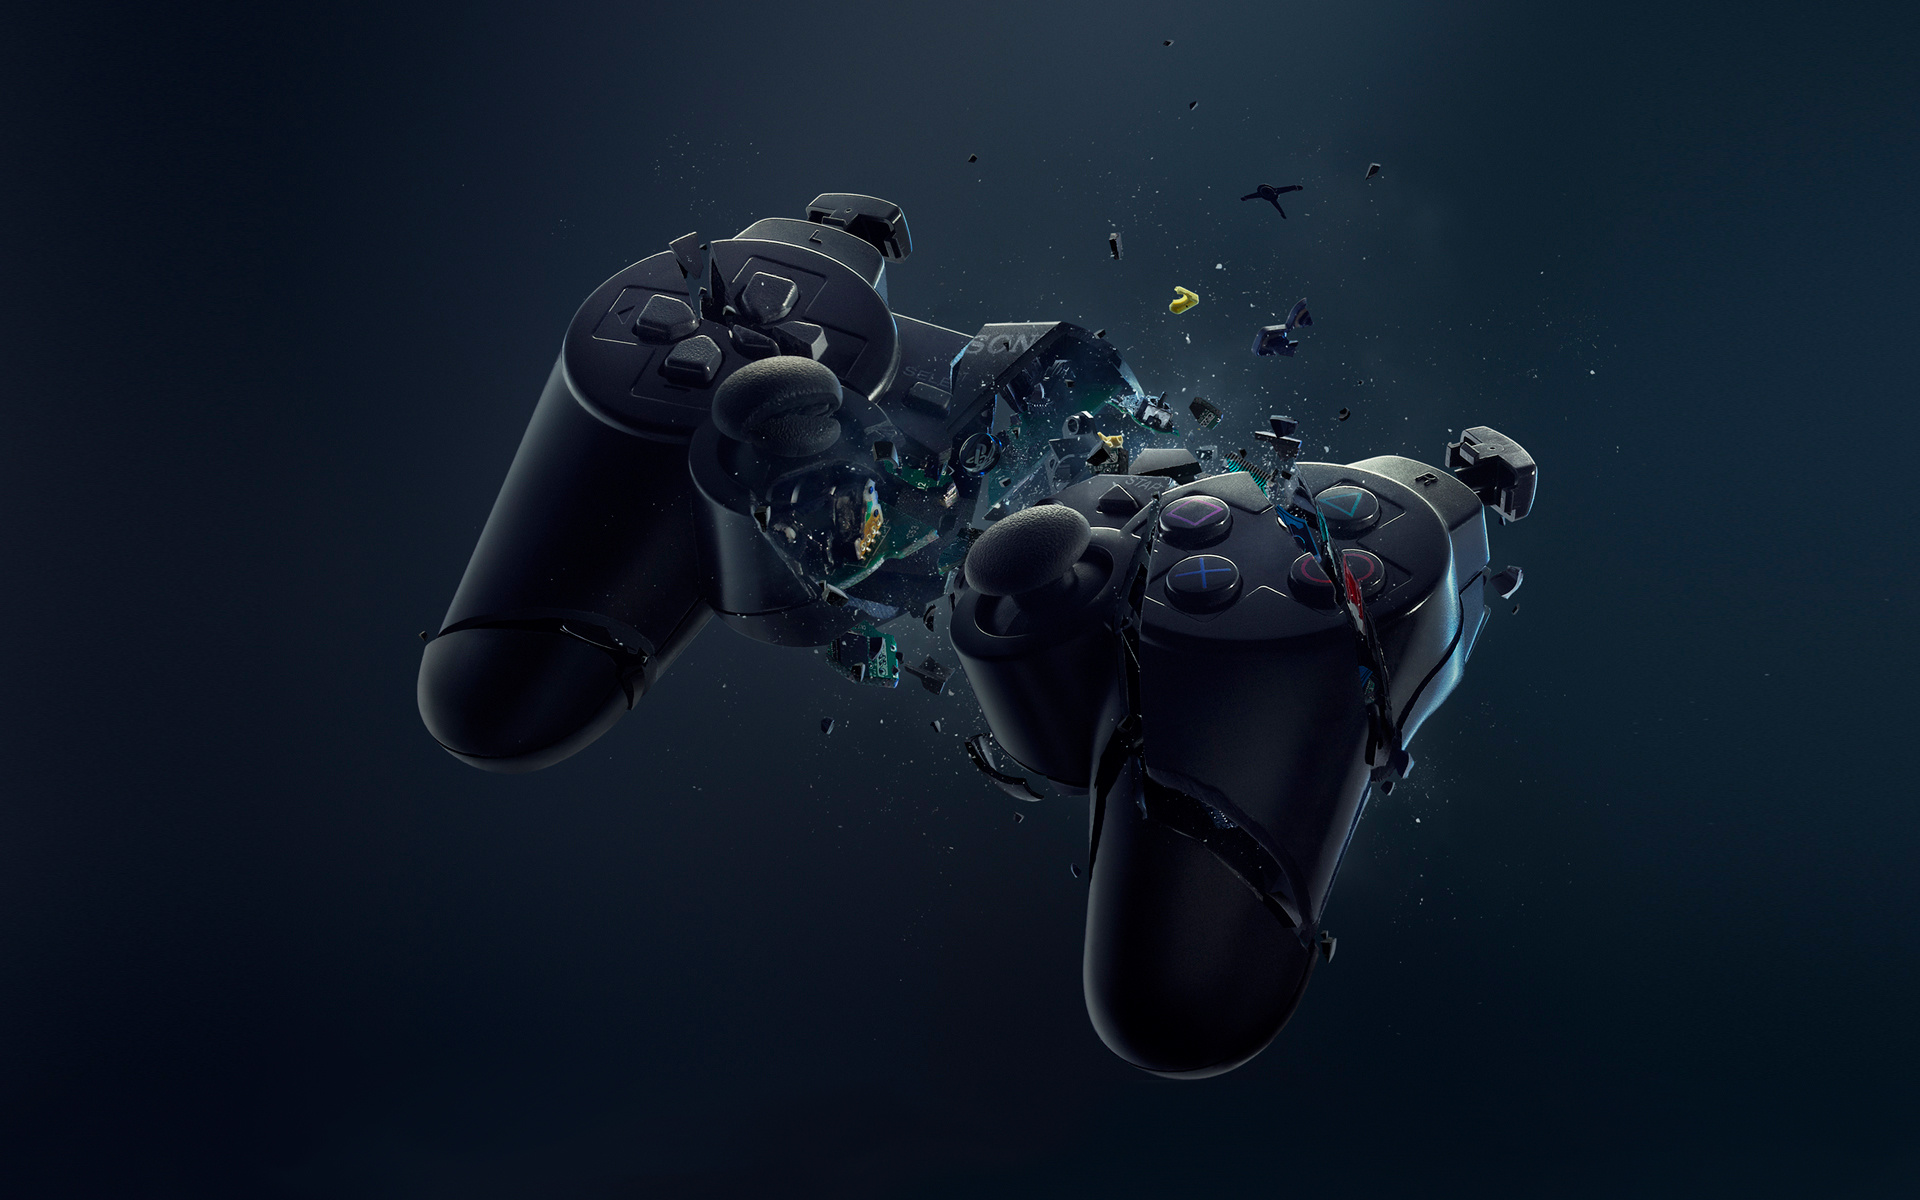 The PlayStation, HD wallpapers, Gaming console, Gaming backgrounds, 1920x1200 HD Desktop